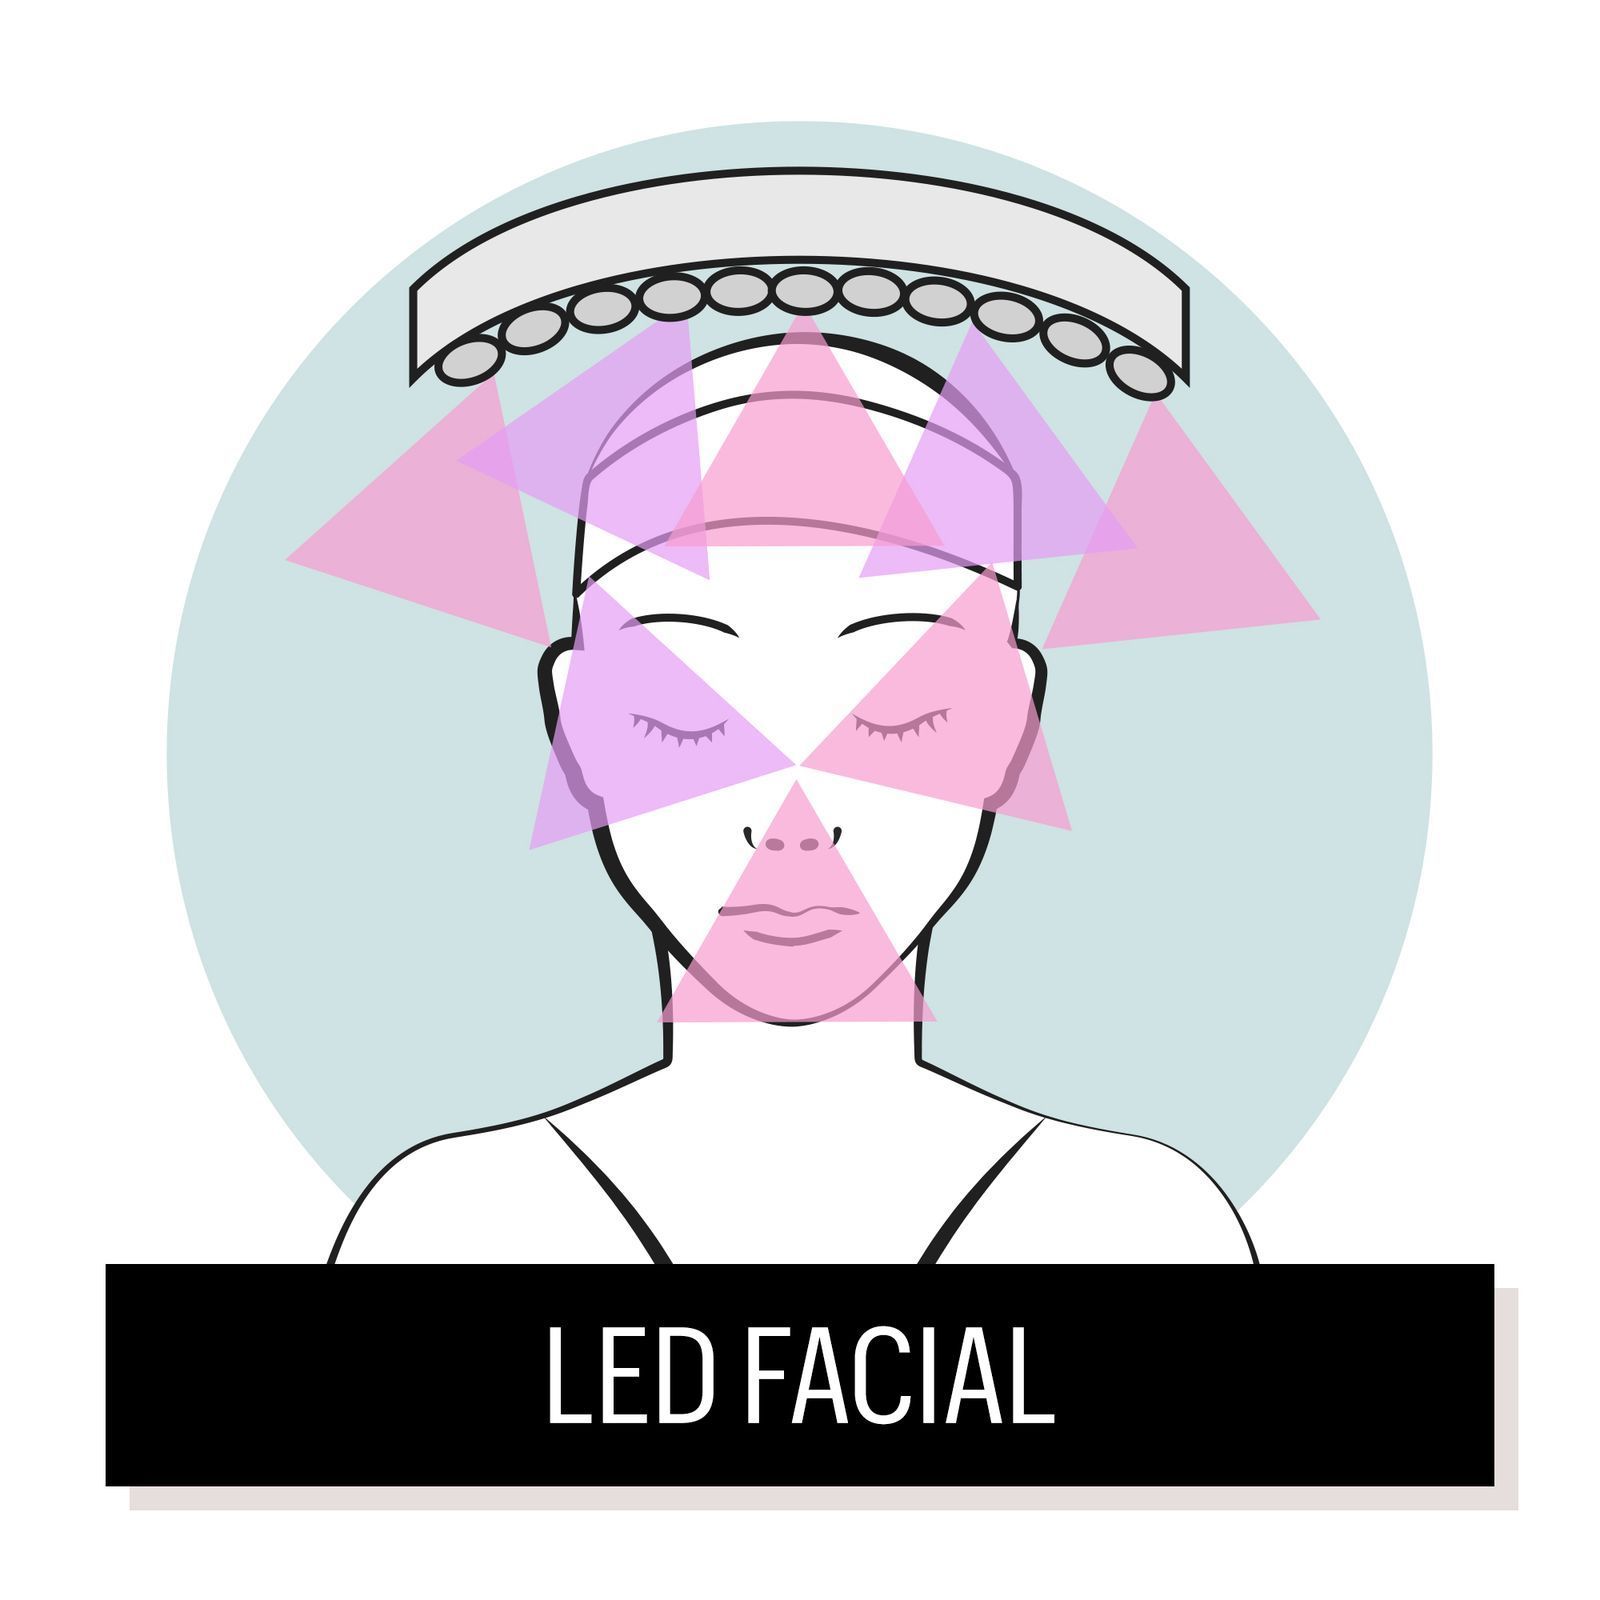 Every Facial and Why You Need It - Every Facial and Why You Need It -   16 beauty Therapy pictures ideas